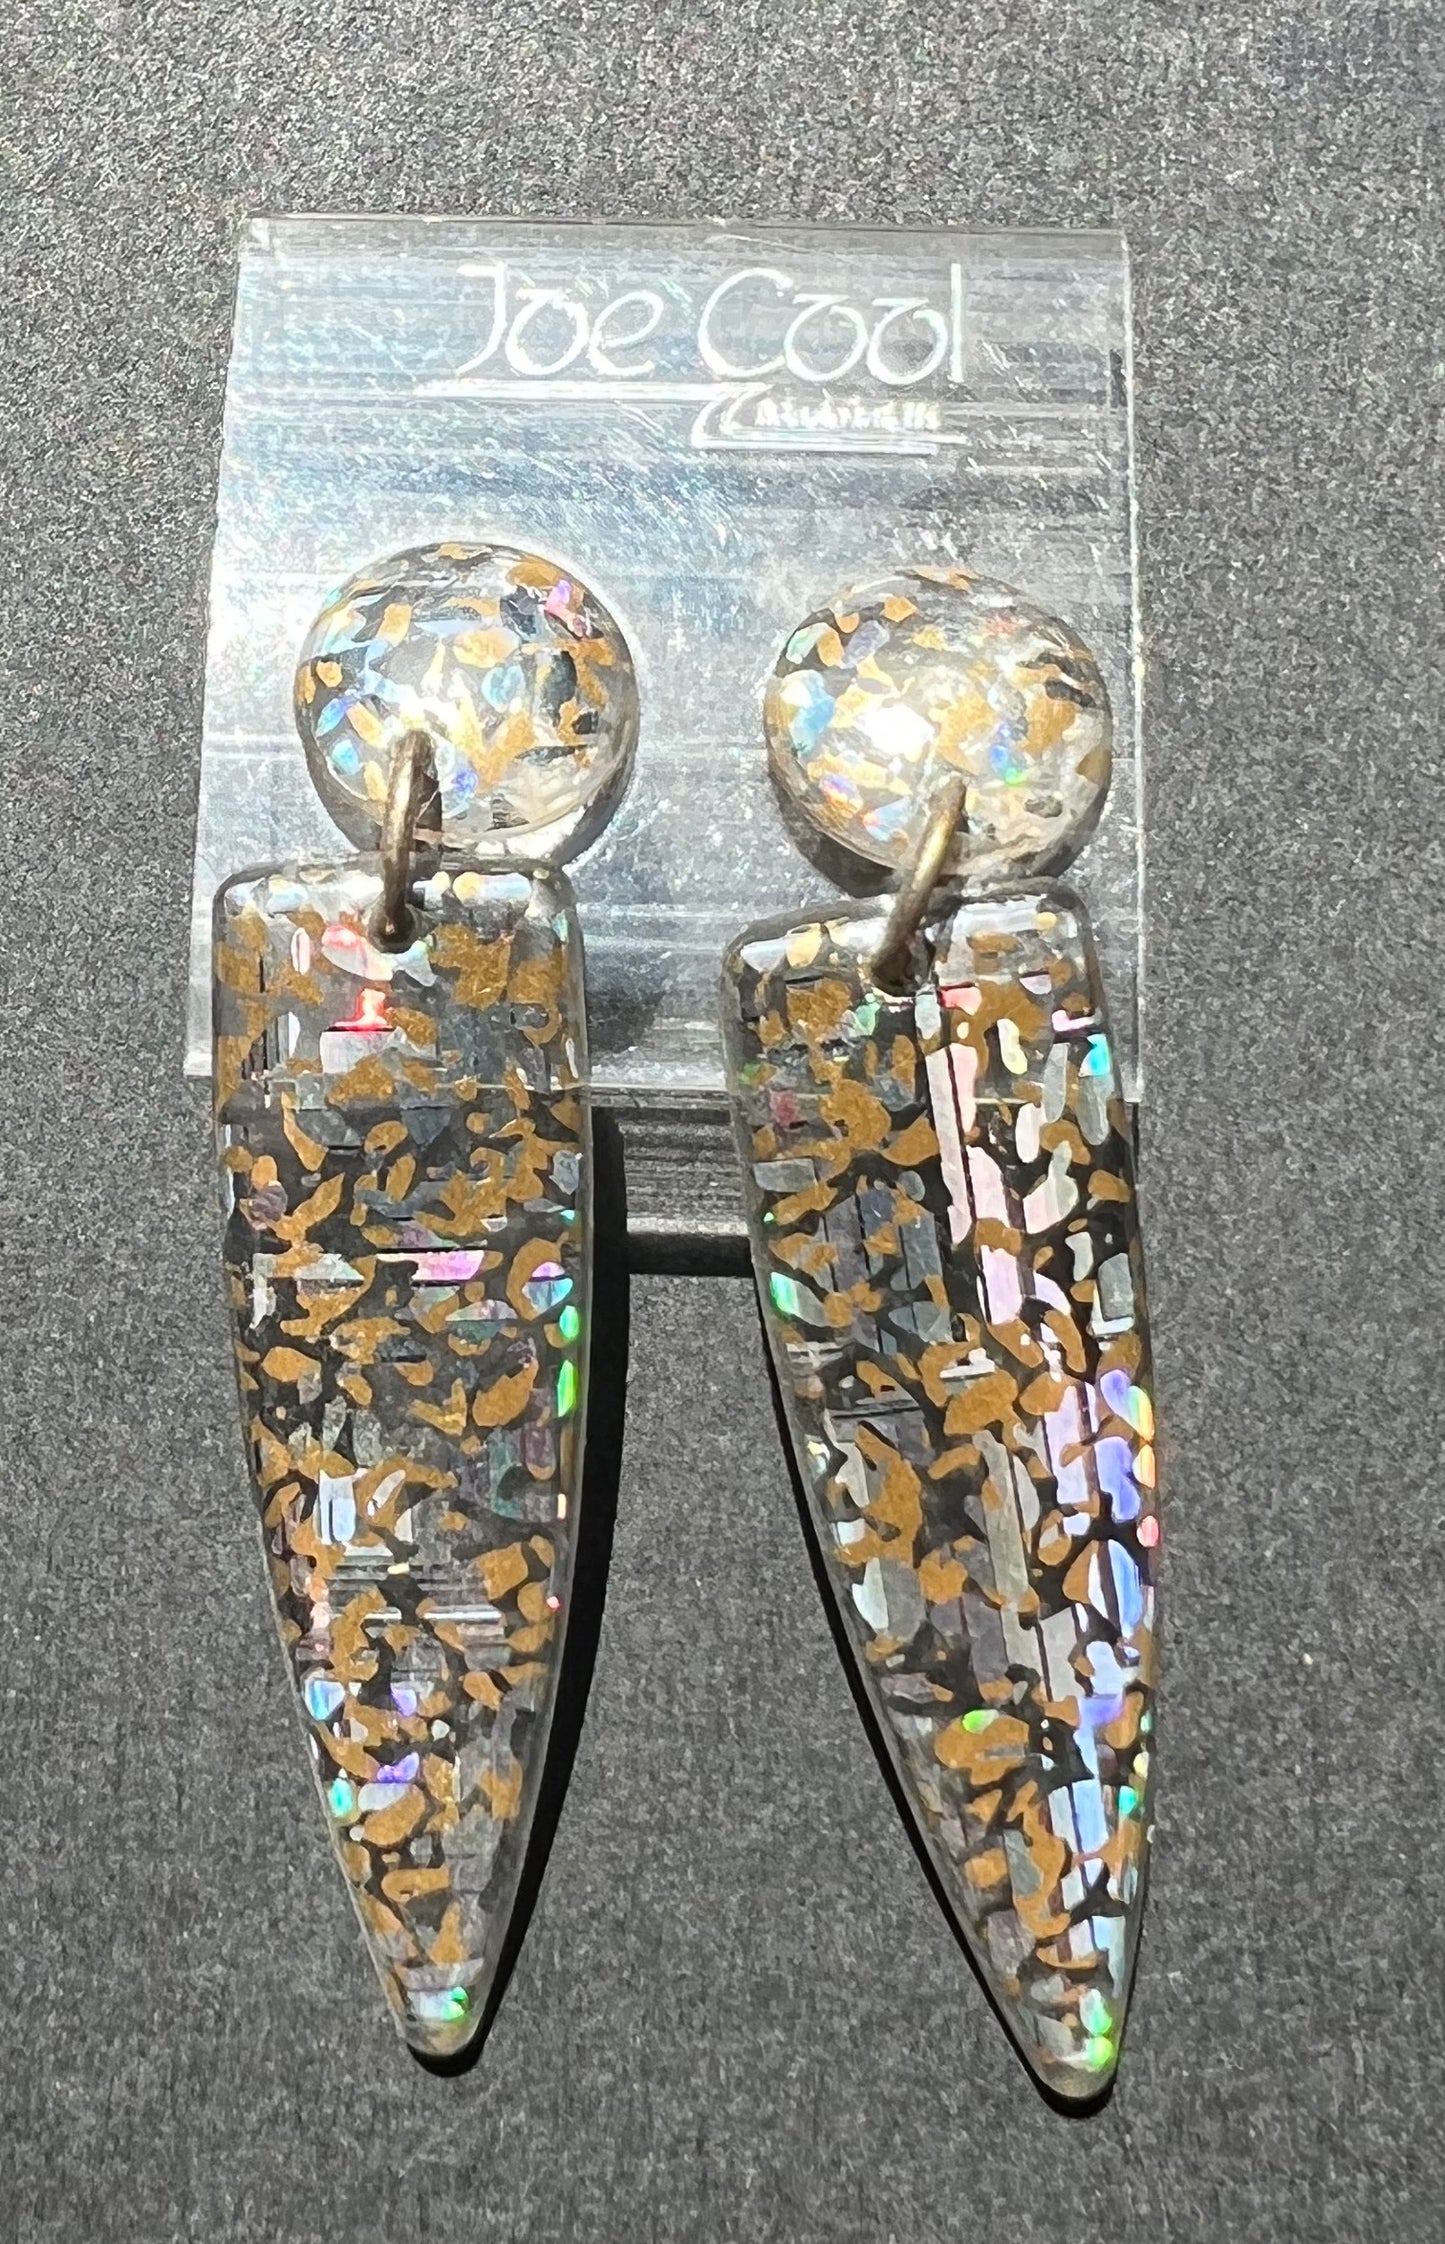 Genuine 1980s Glittery Perspex Earrings - Perfect for The Disco